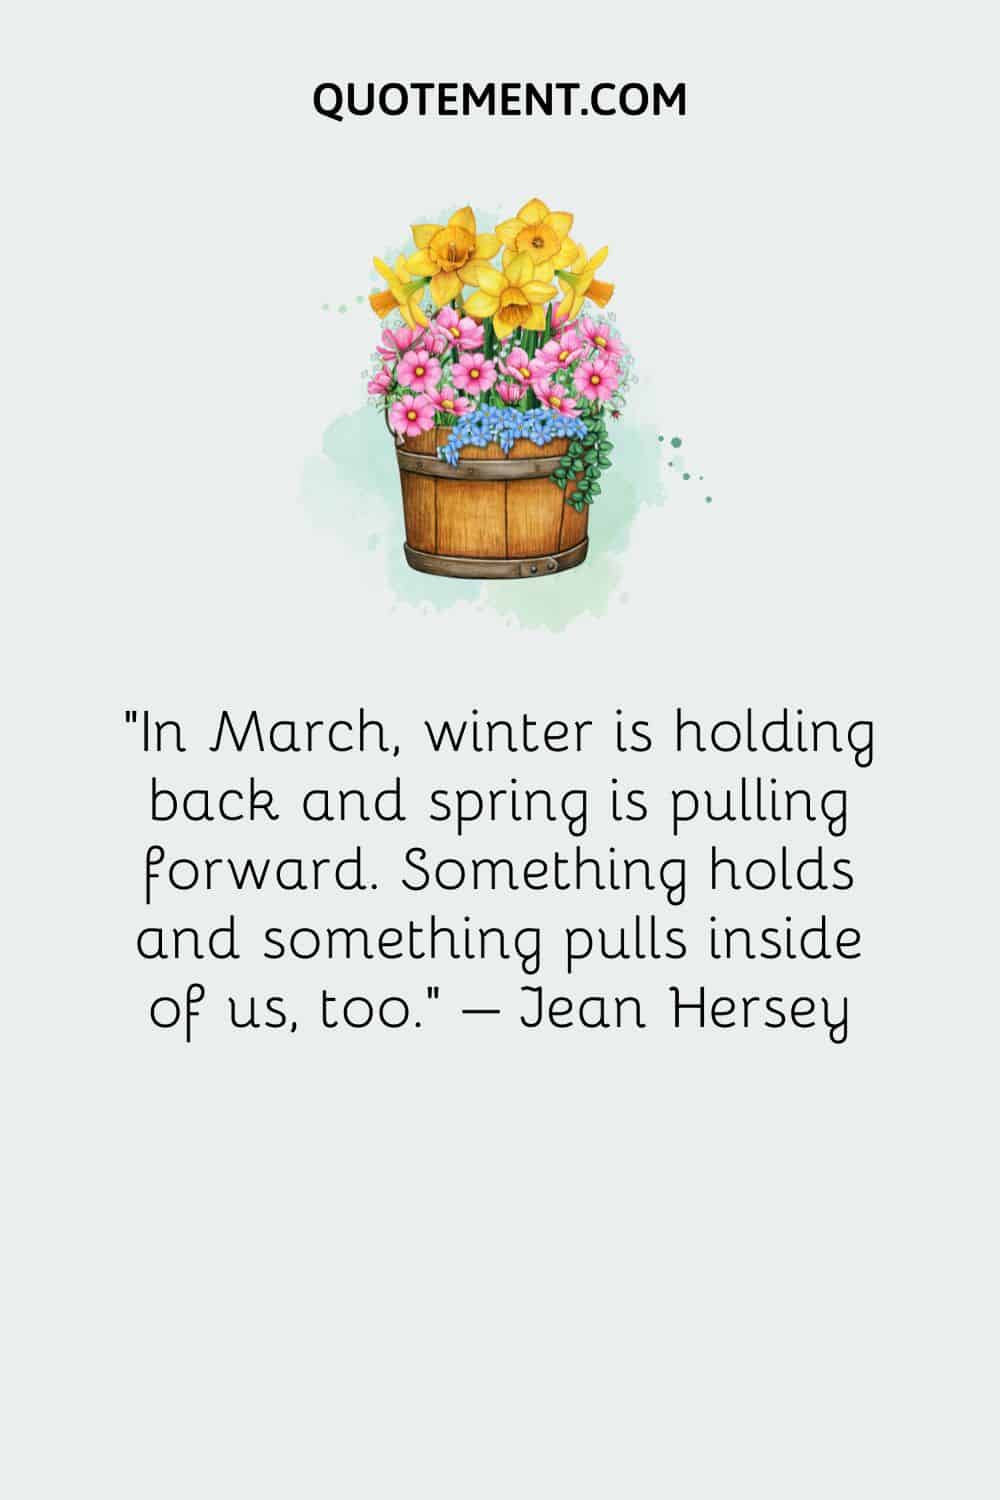 In March, winter is holding back and spring is pulling forward. Something holds and something pulls inside of us, too. – Jean Hersey